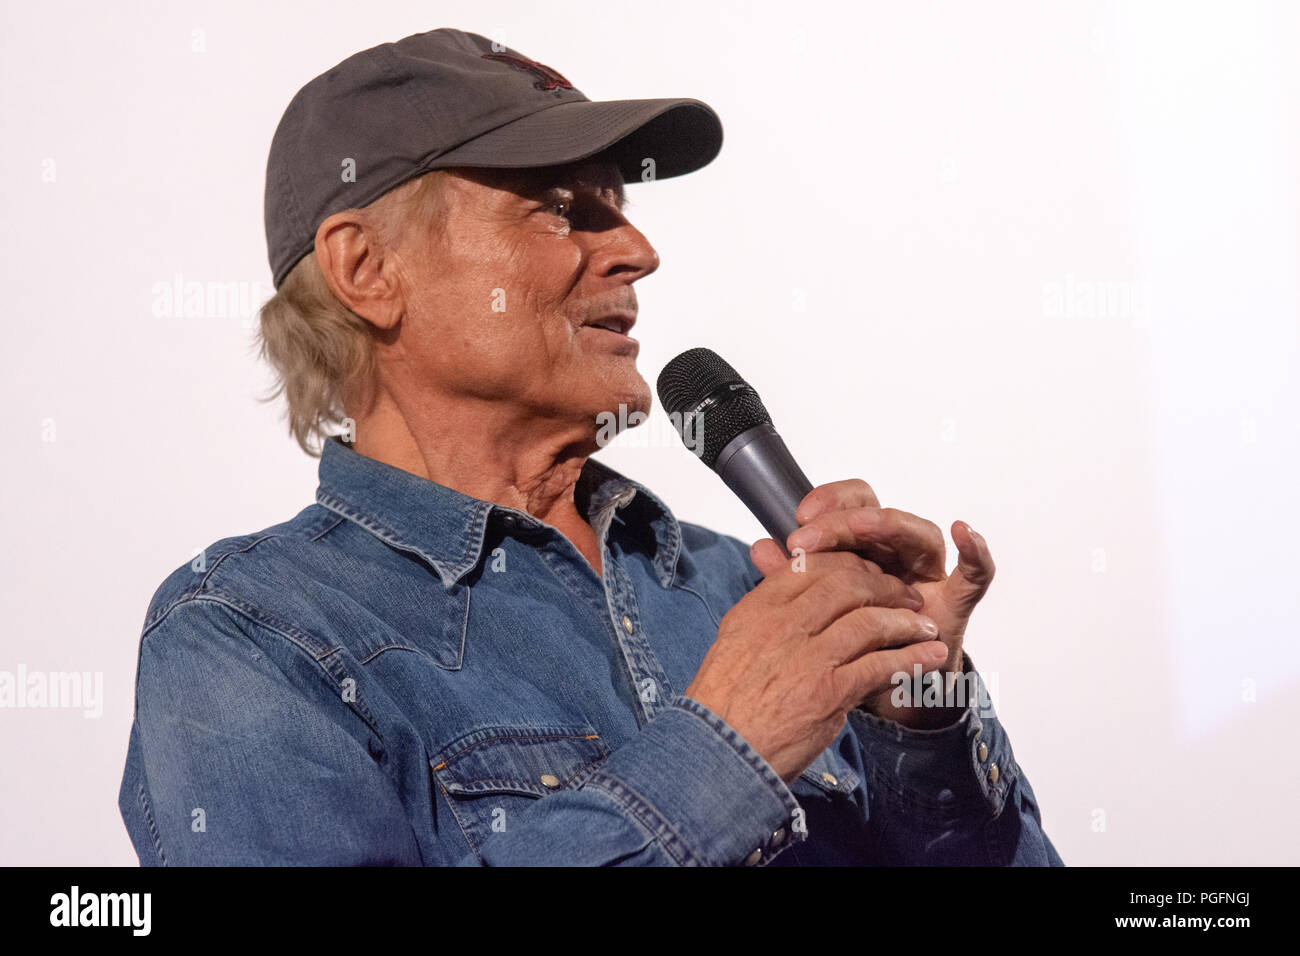 SULZBACH, AUGUST 25 2018: Actor Terence Hill (*1939) presents his newest movie "My Name is Thomas" in Sulzbach, Germany as part of a film tour Credit: Markus Wissmann/Alamy Live News Stock Photo